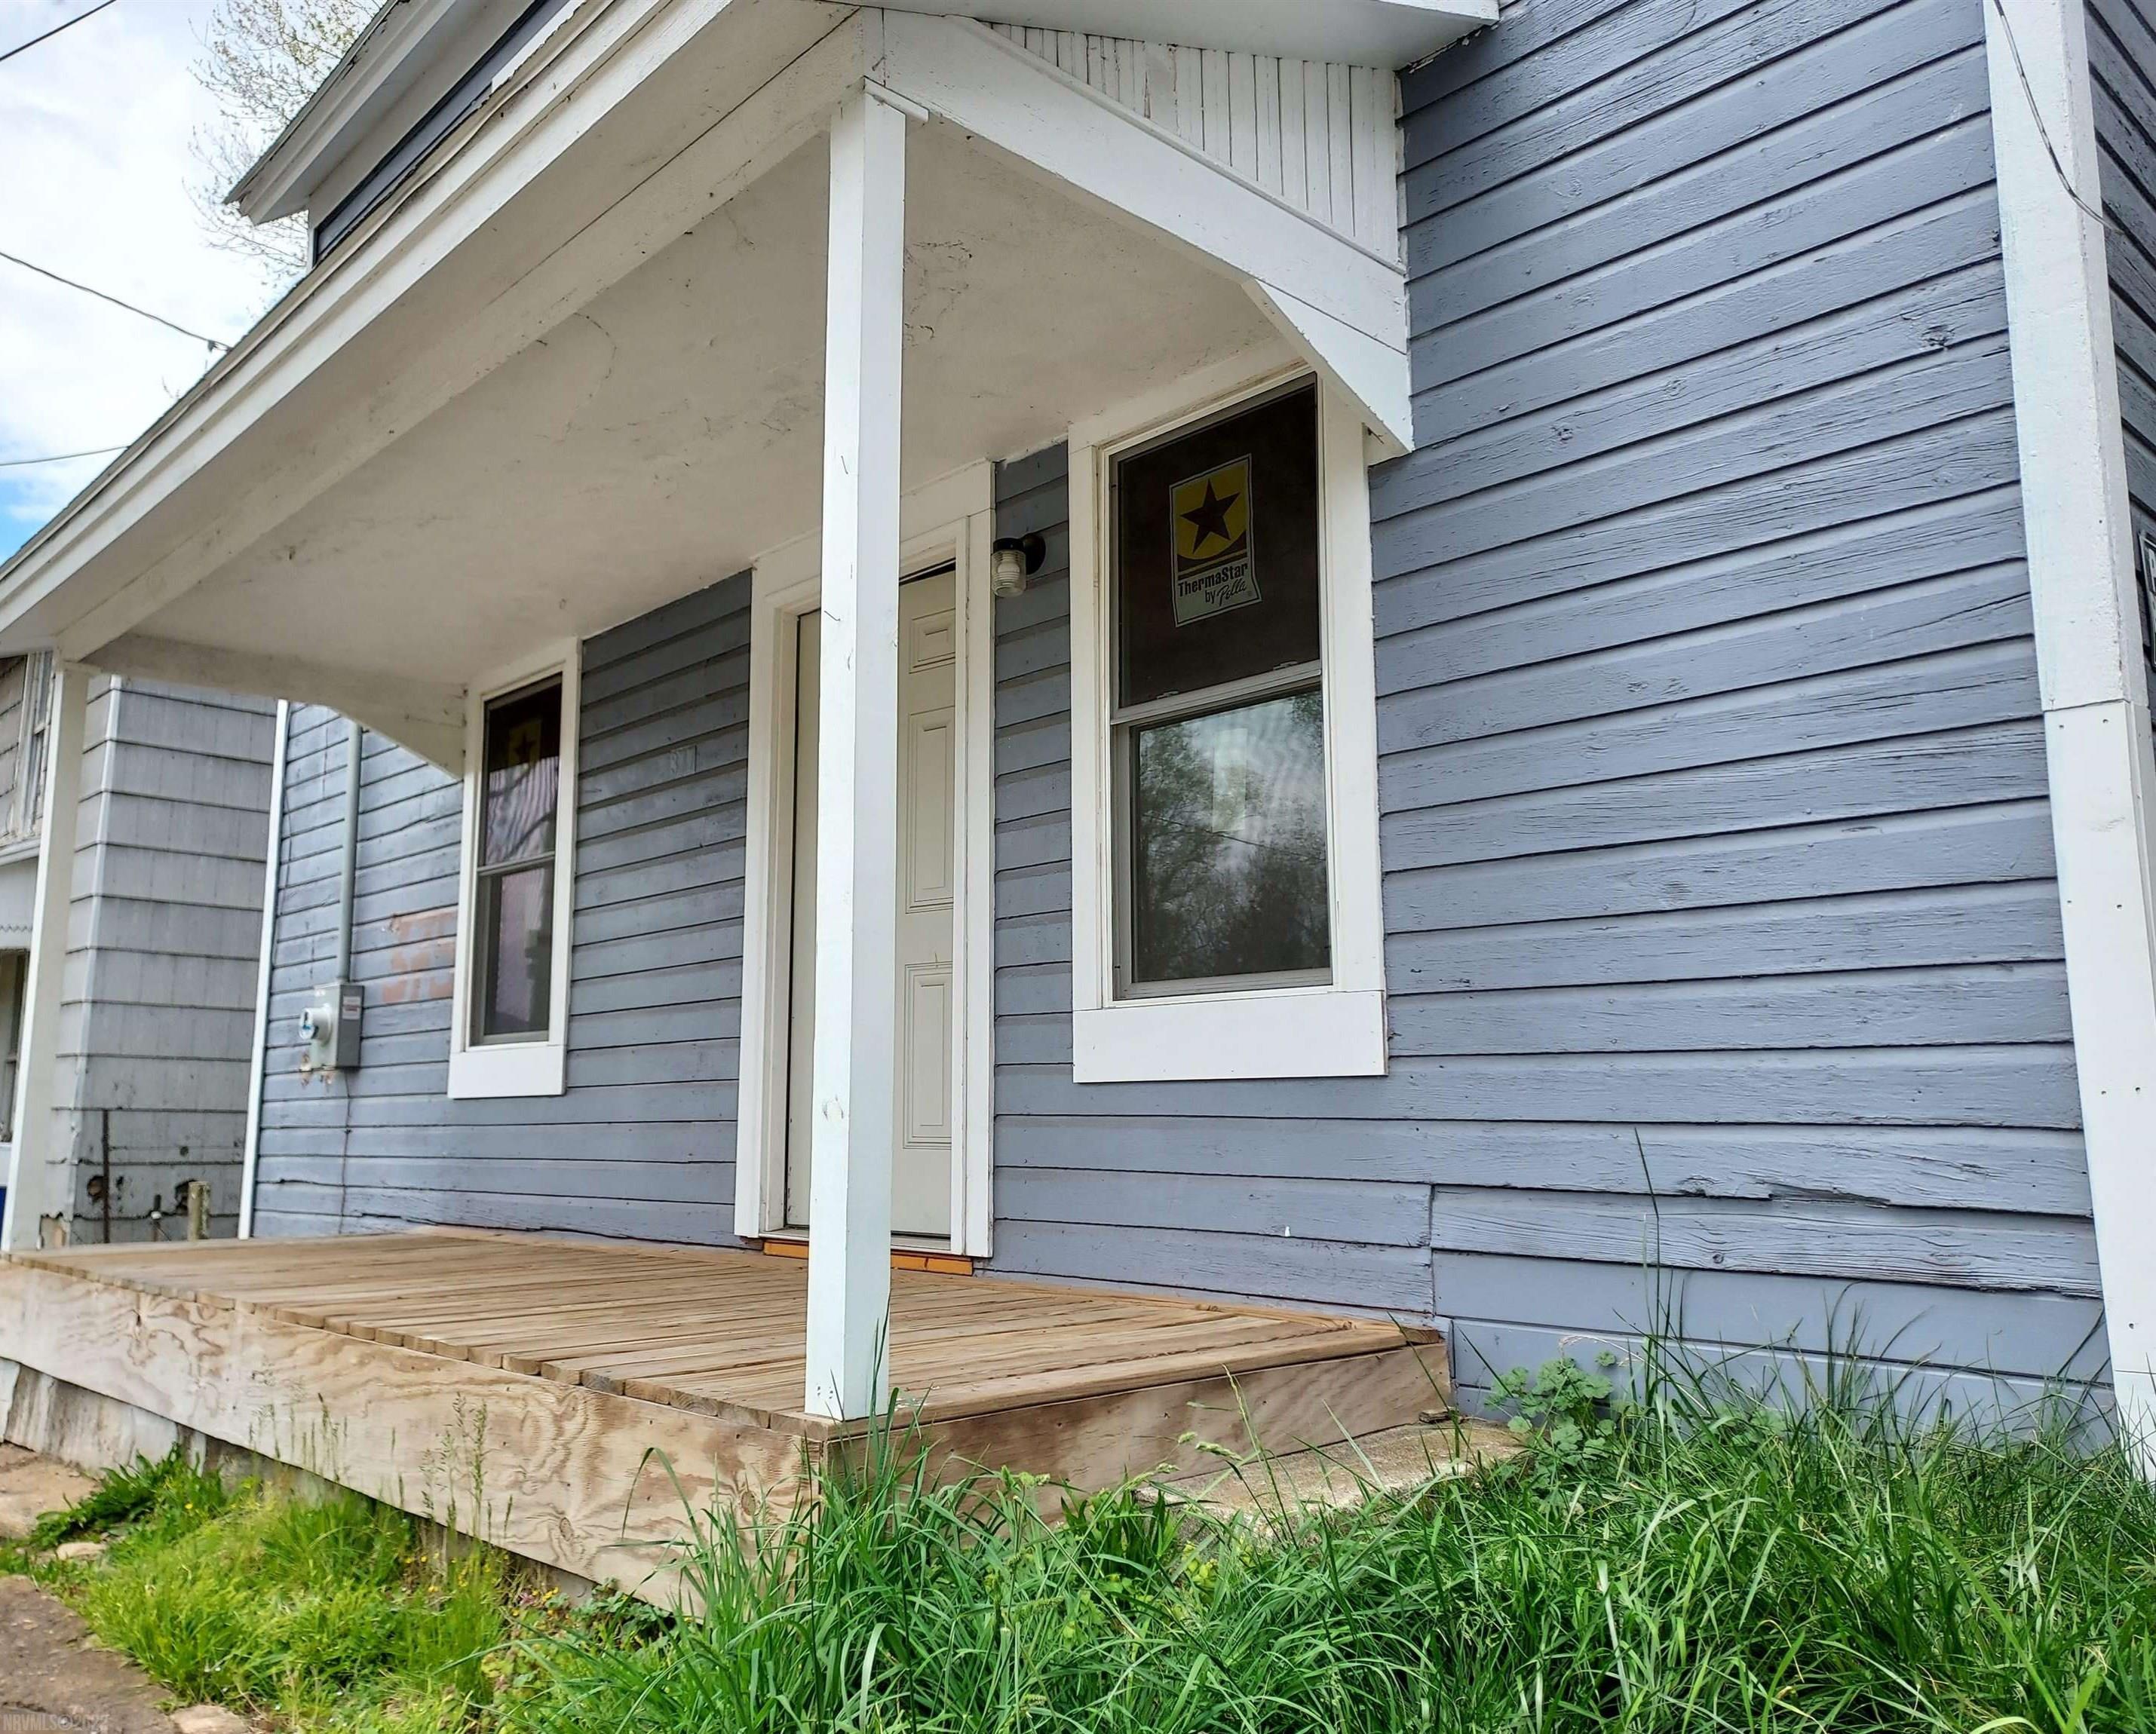 Handyman Special!  This old house has been partially renovated and needs a little extra effort to bring her across the finish line.  Renovations include new electric, new windows, new kitchen & bath and new flooring.